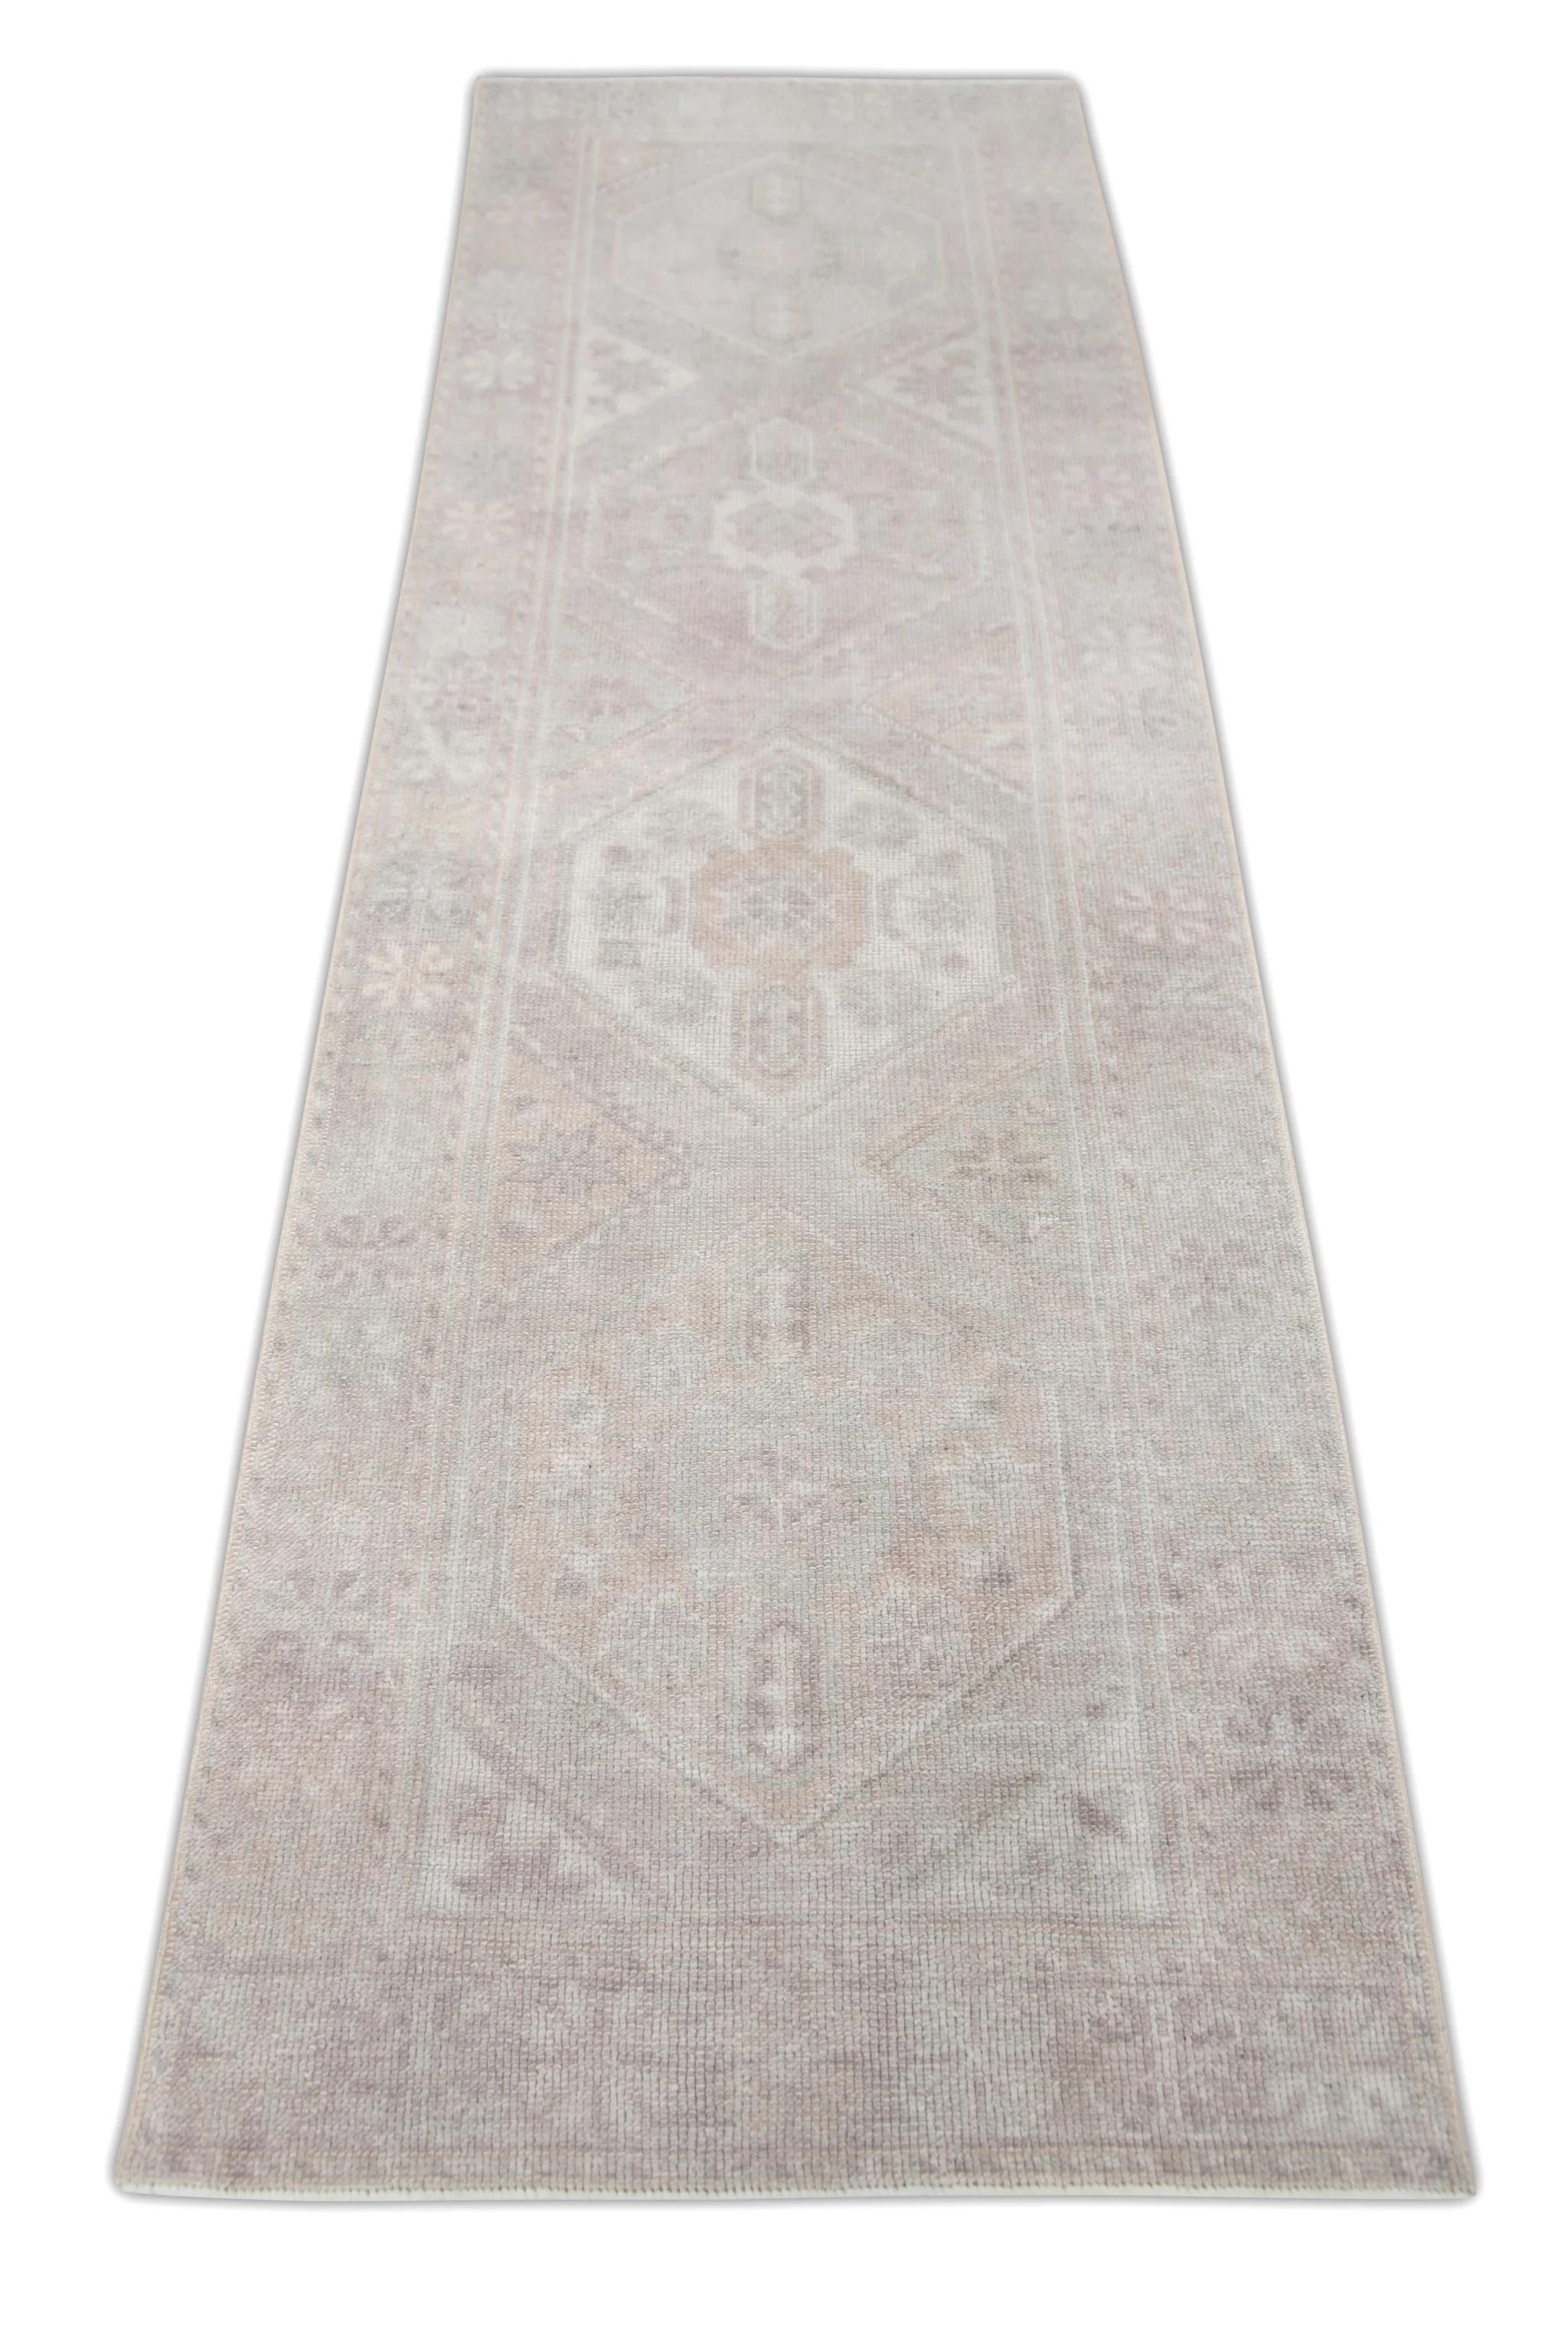 Contemporary Pink Floral Design Handwoven Wool Turkish Oushak Rug 2'10